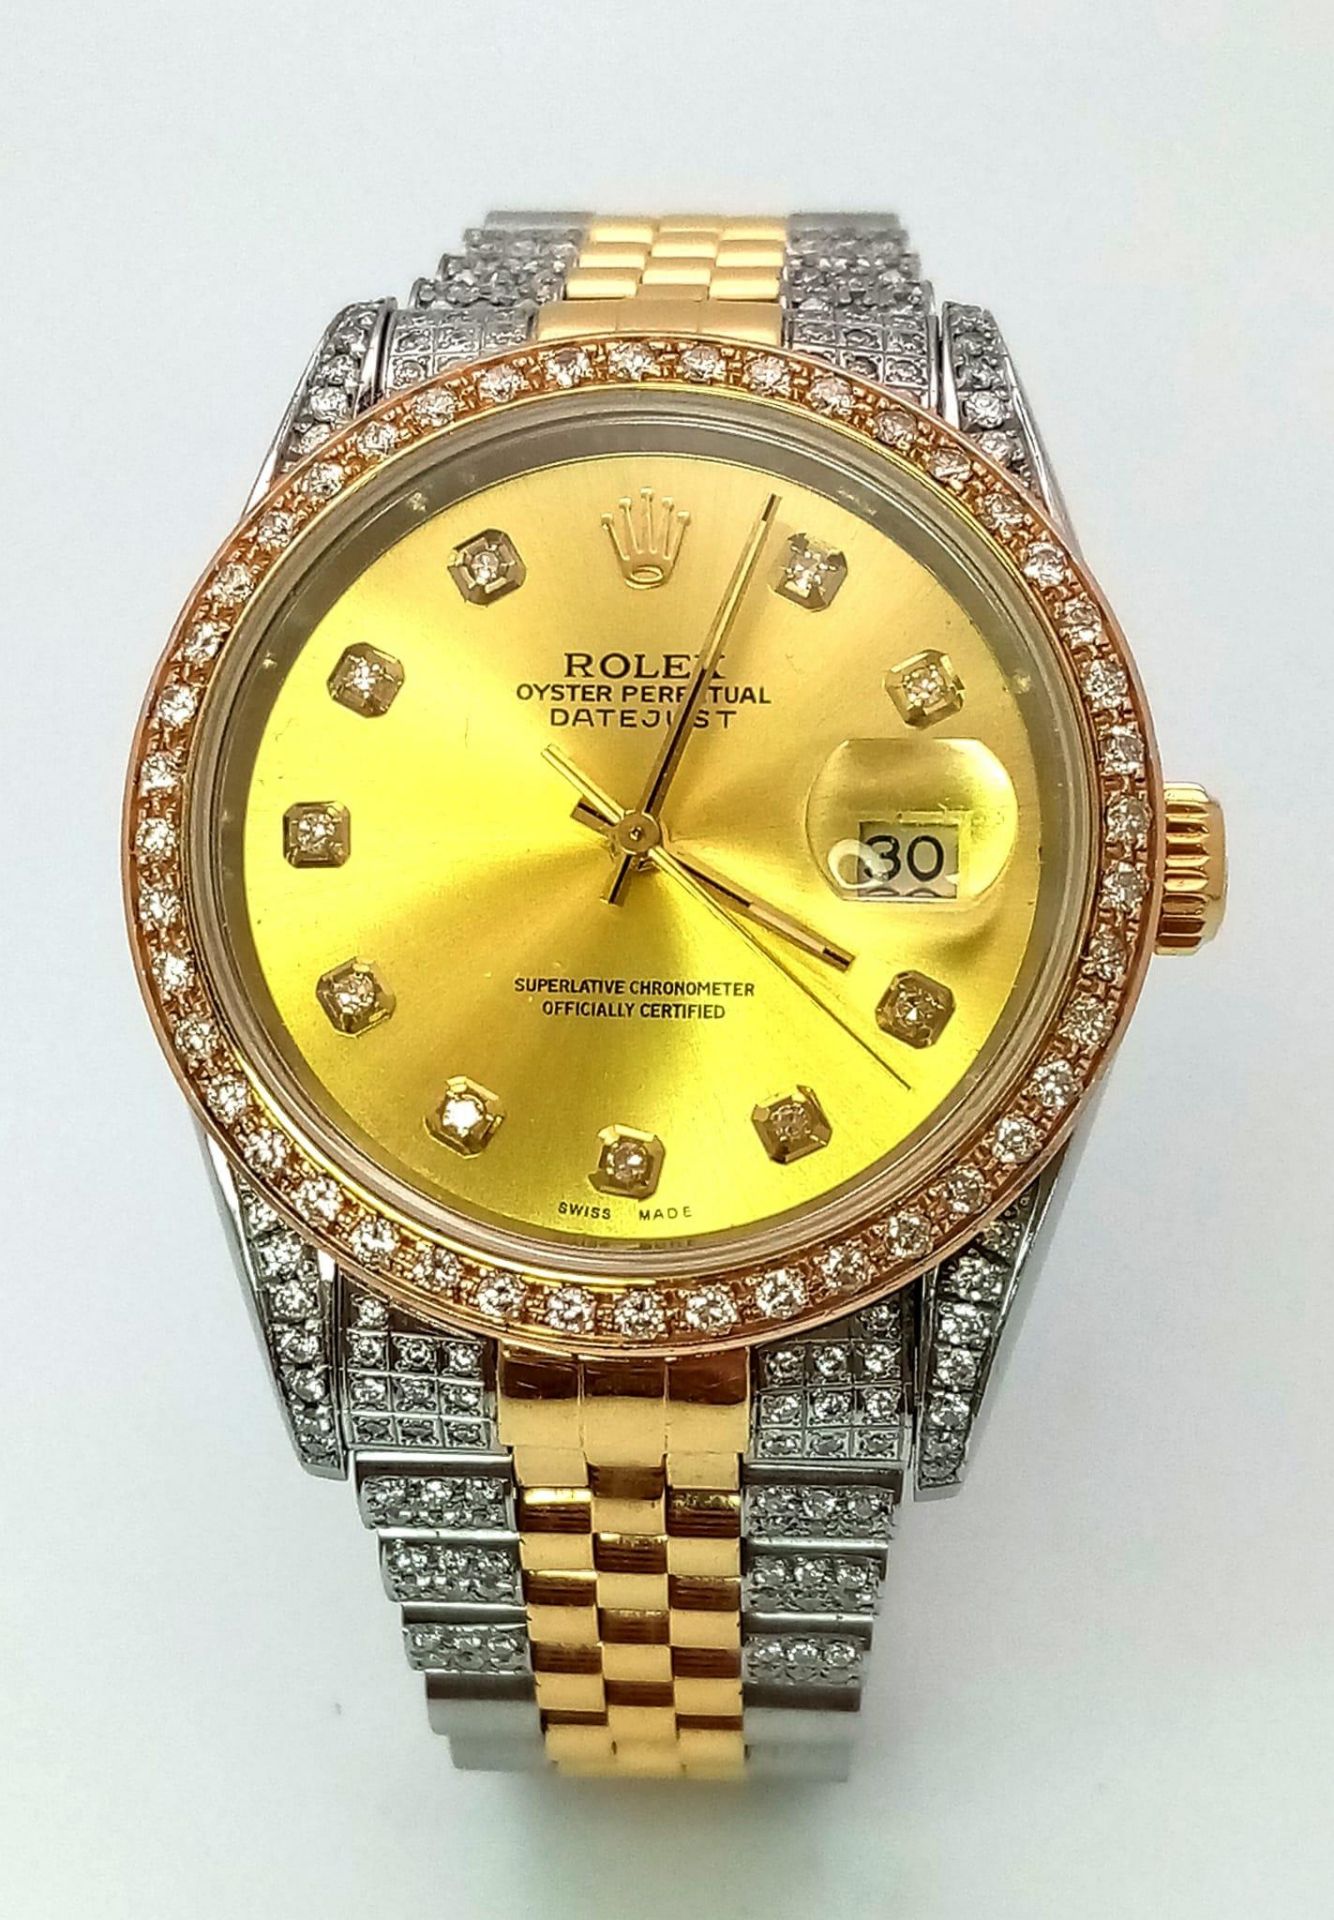 A Rolex Oyster Perpetual Datejust Bi-Metal Diamond Gents Watch. Gold, stainless steel and diamond